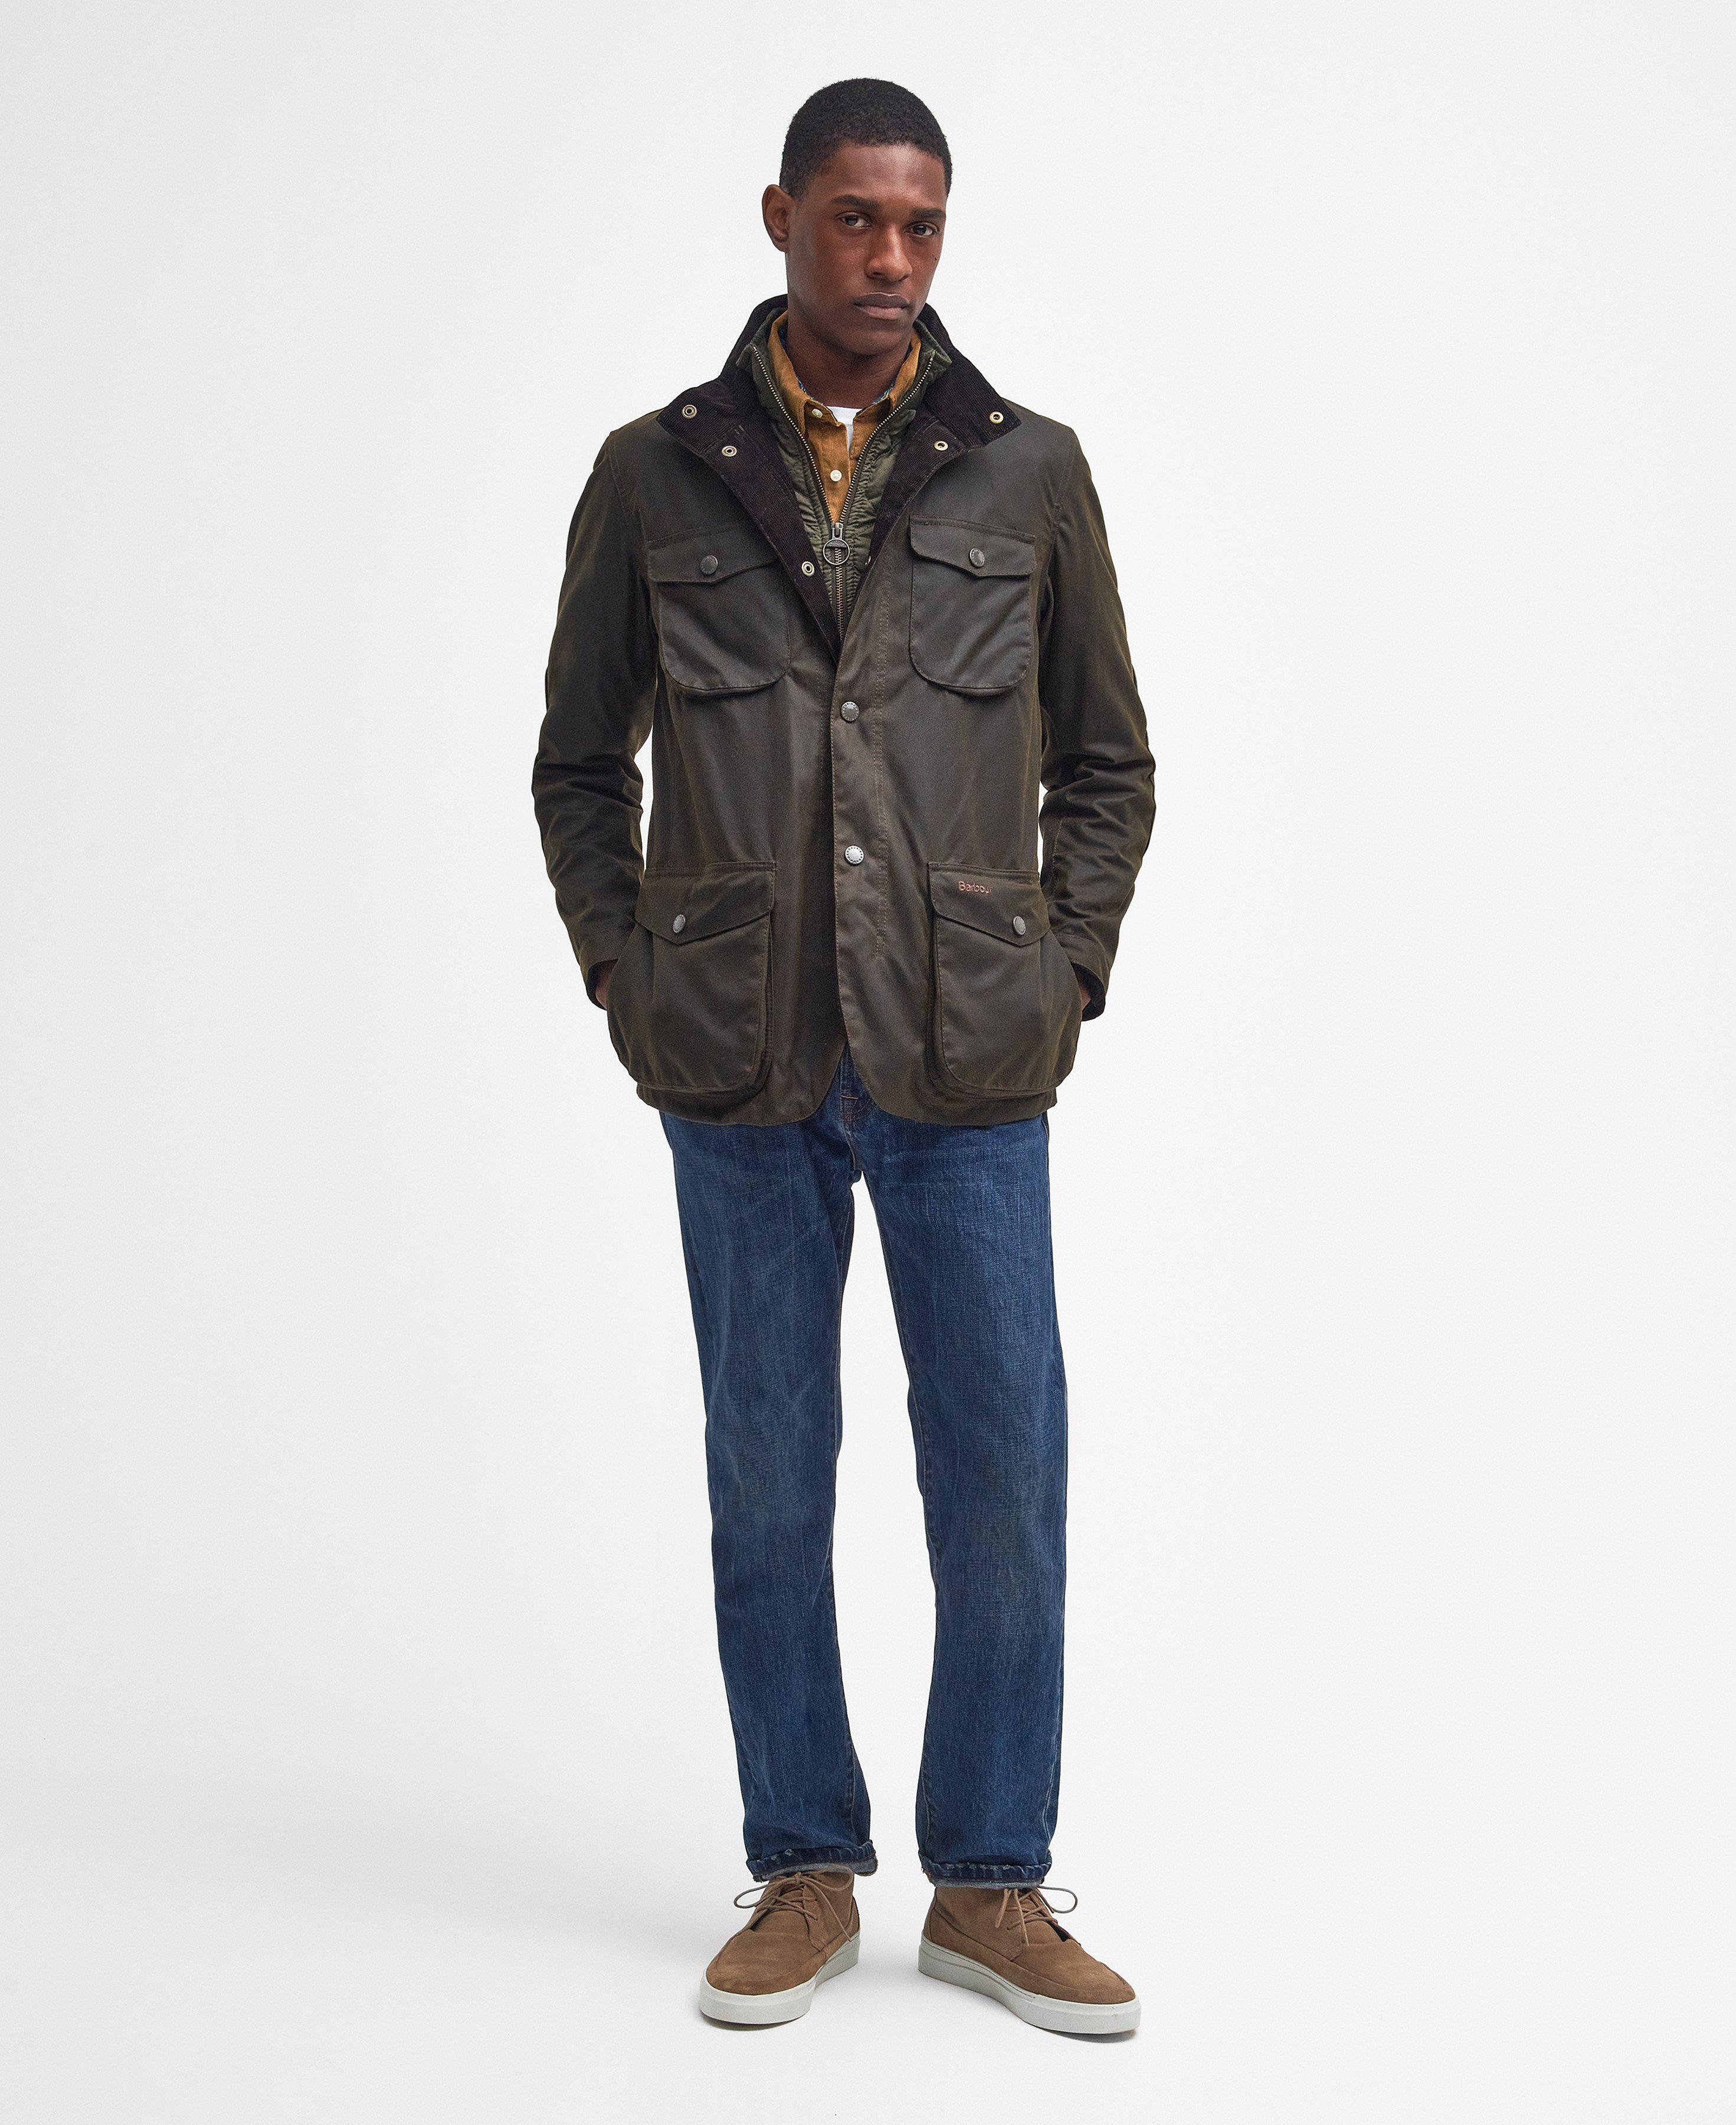 Barbour Ogston Wax Jacket in Olive | Barbour